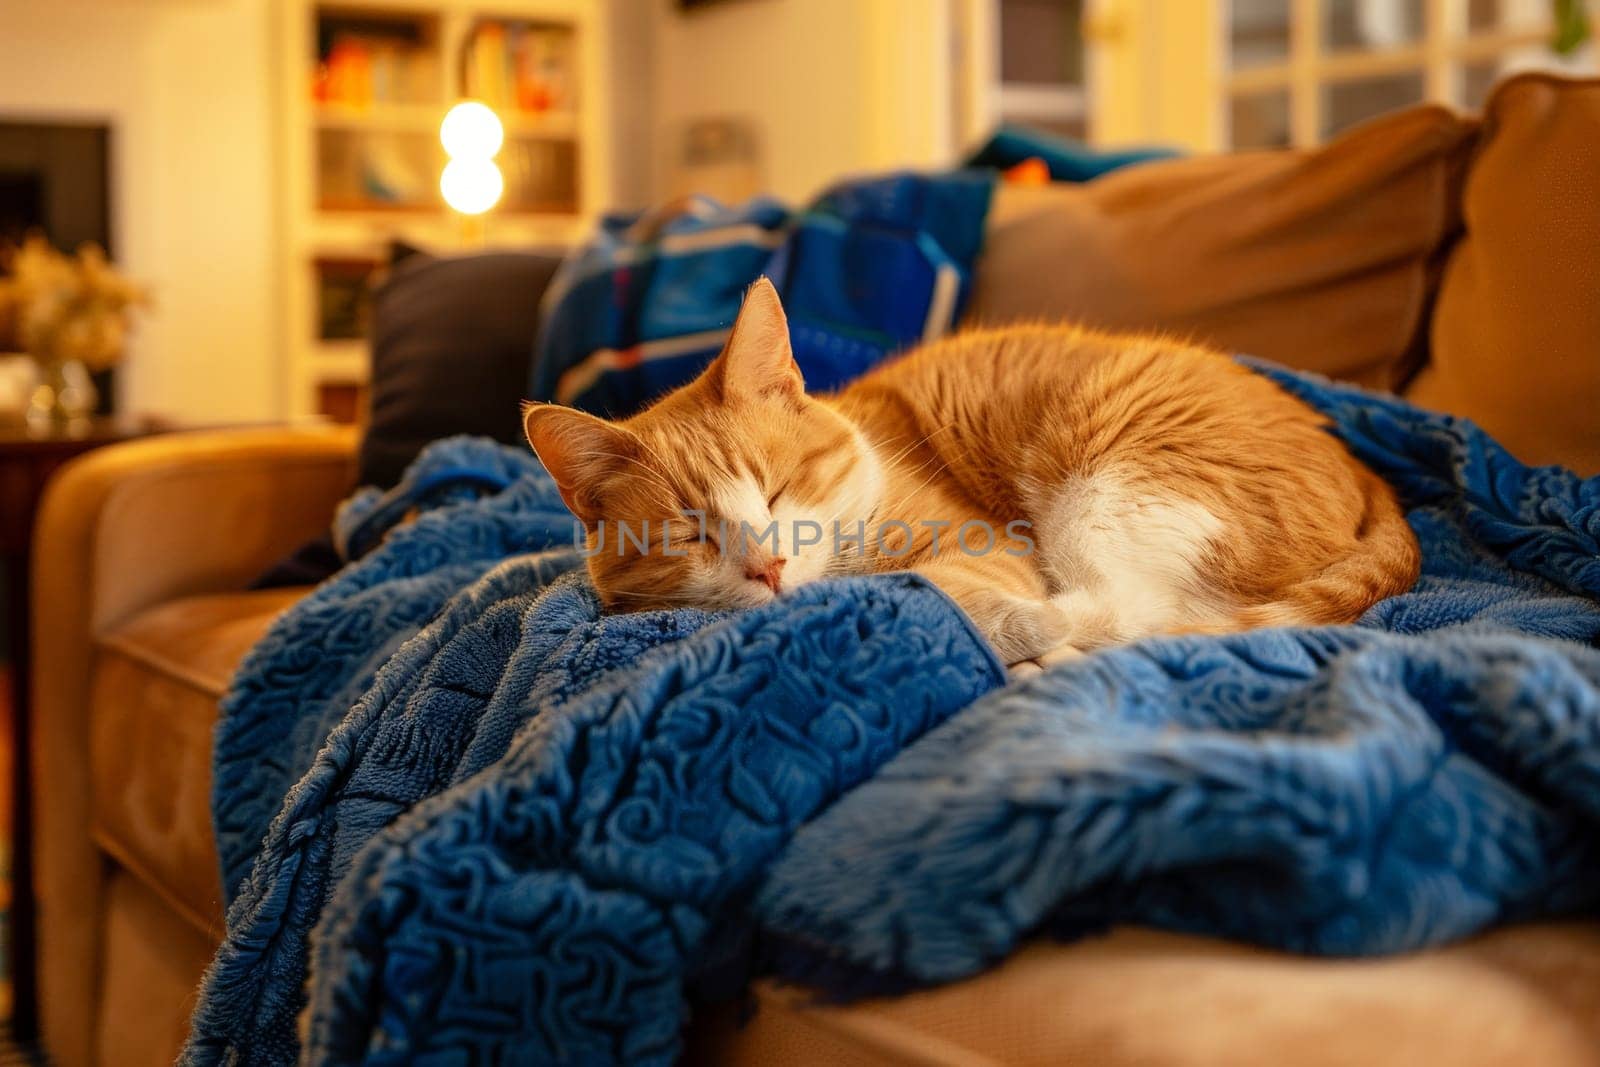 A cat is sleeping on a blue blanket on a couch.